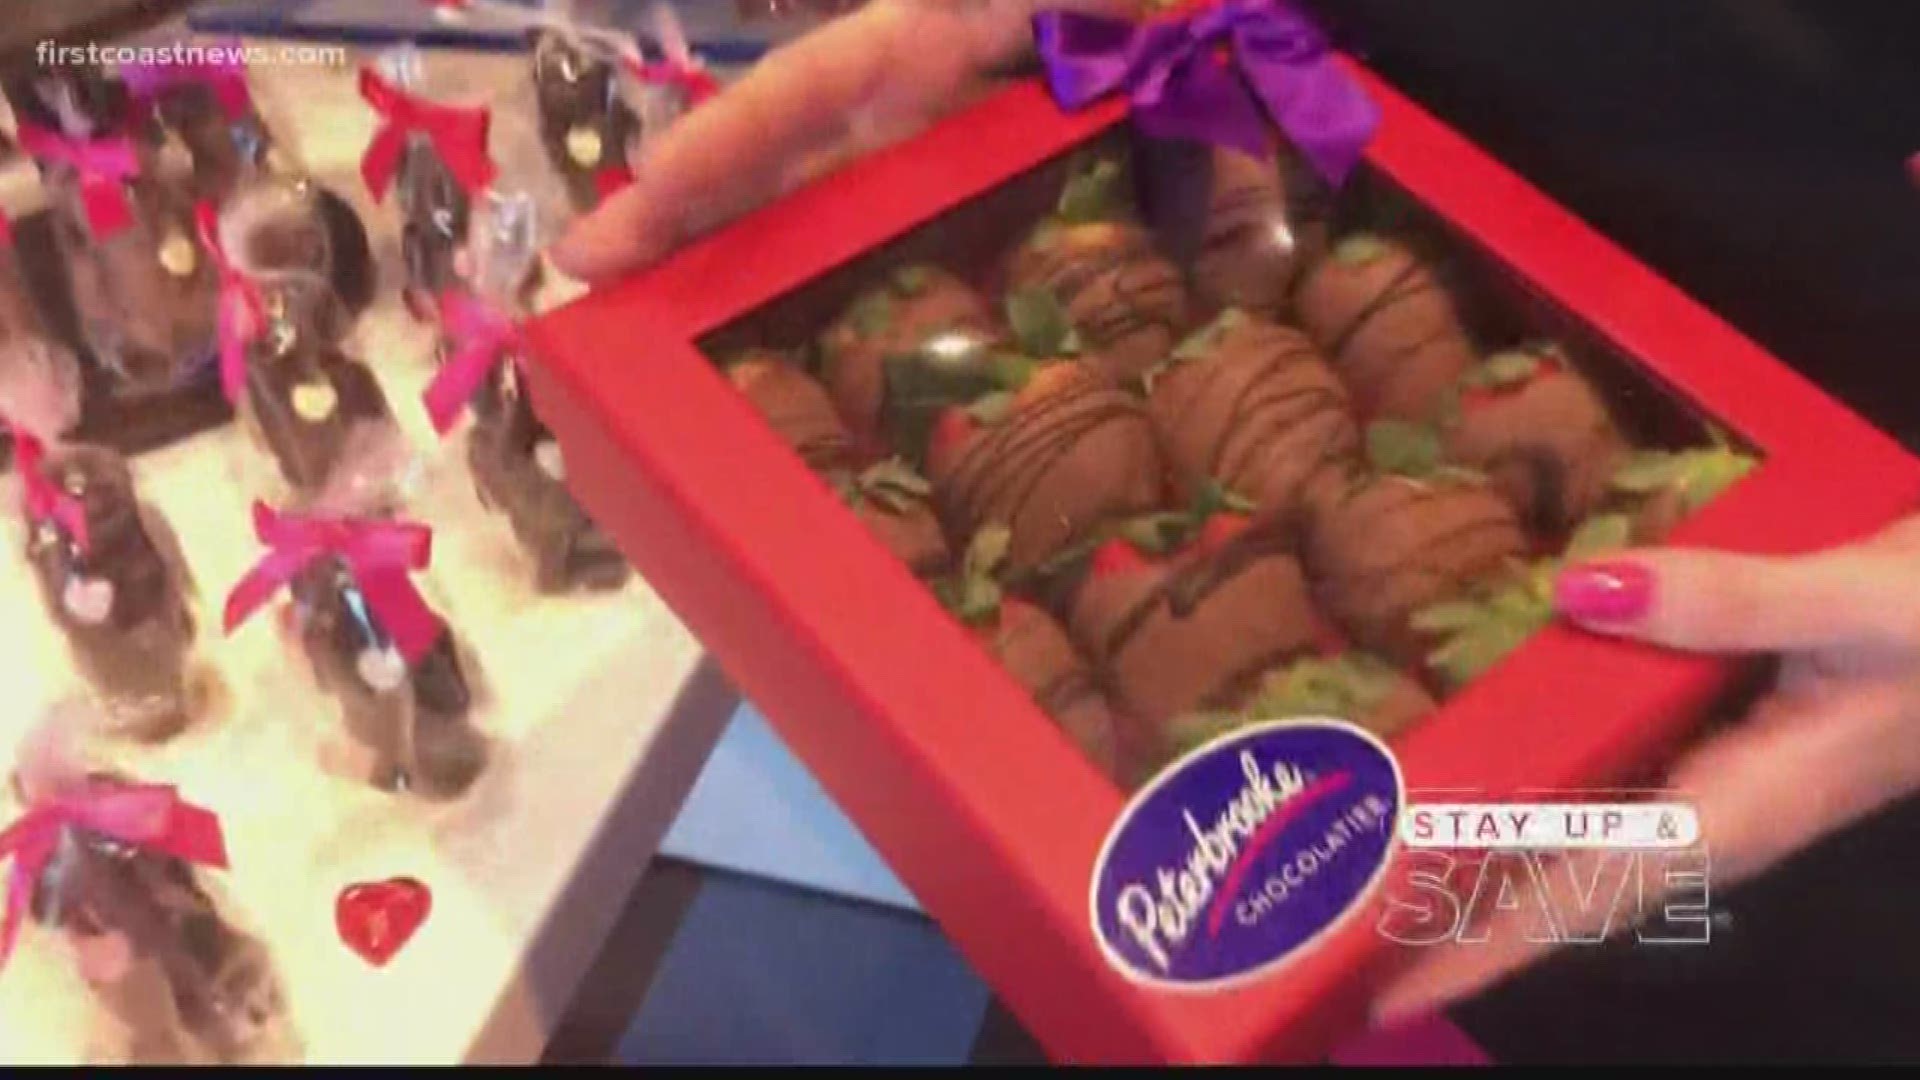 We're staying up and saving you money on Valentine's Day gifts. Today's topic is chocolate.